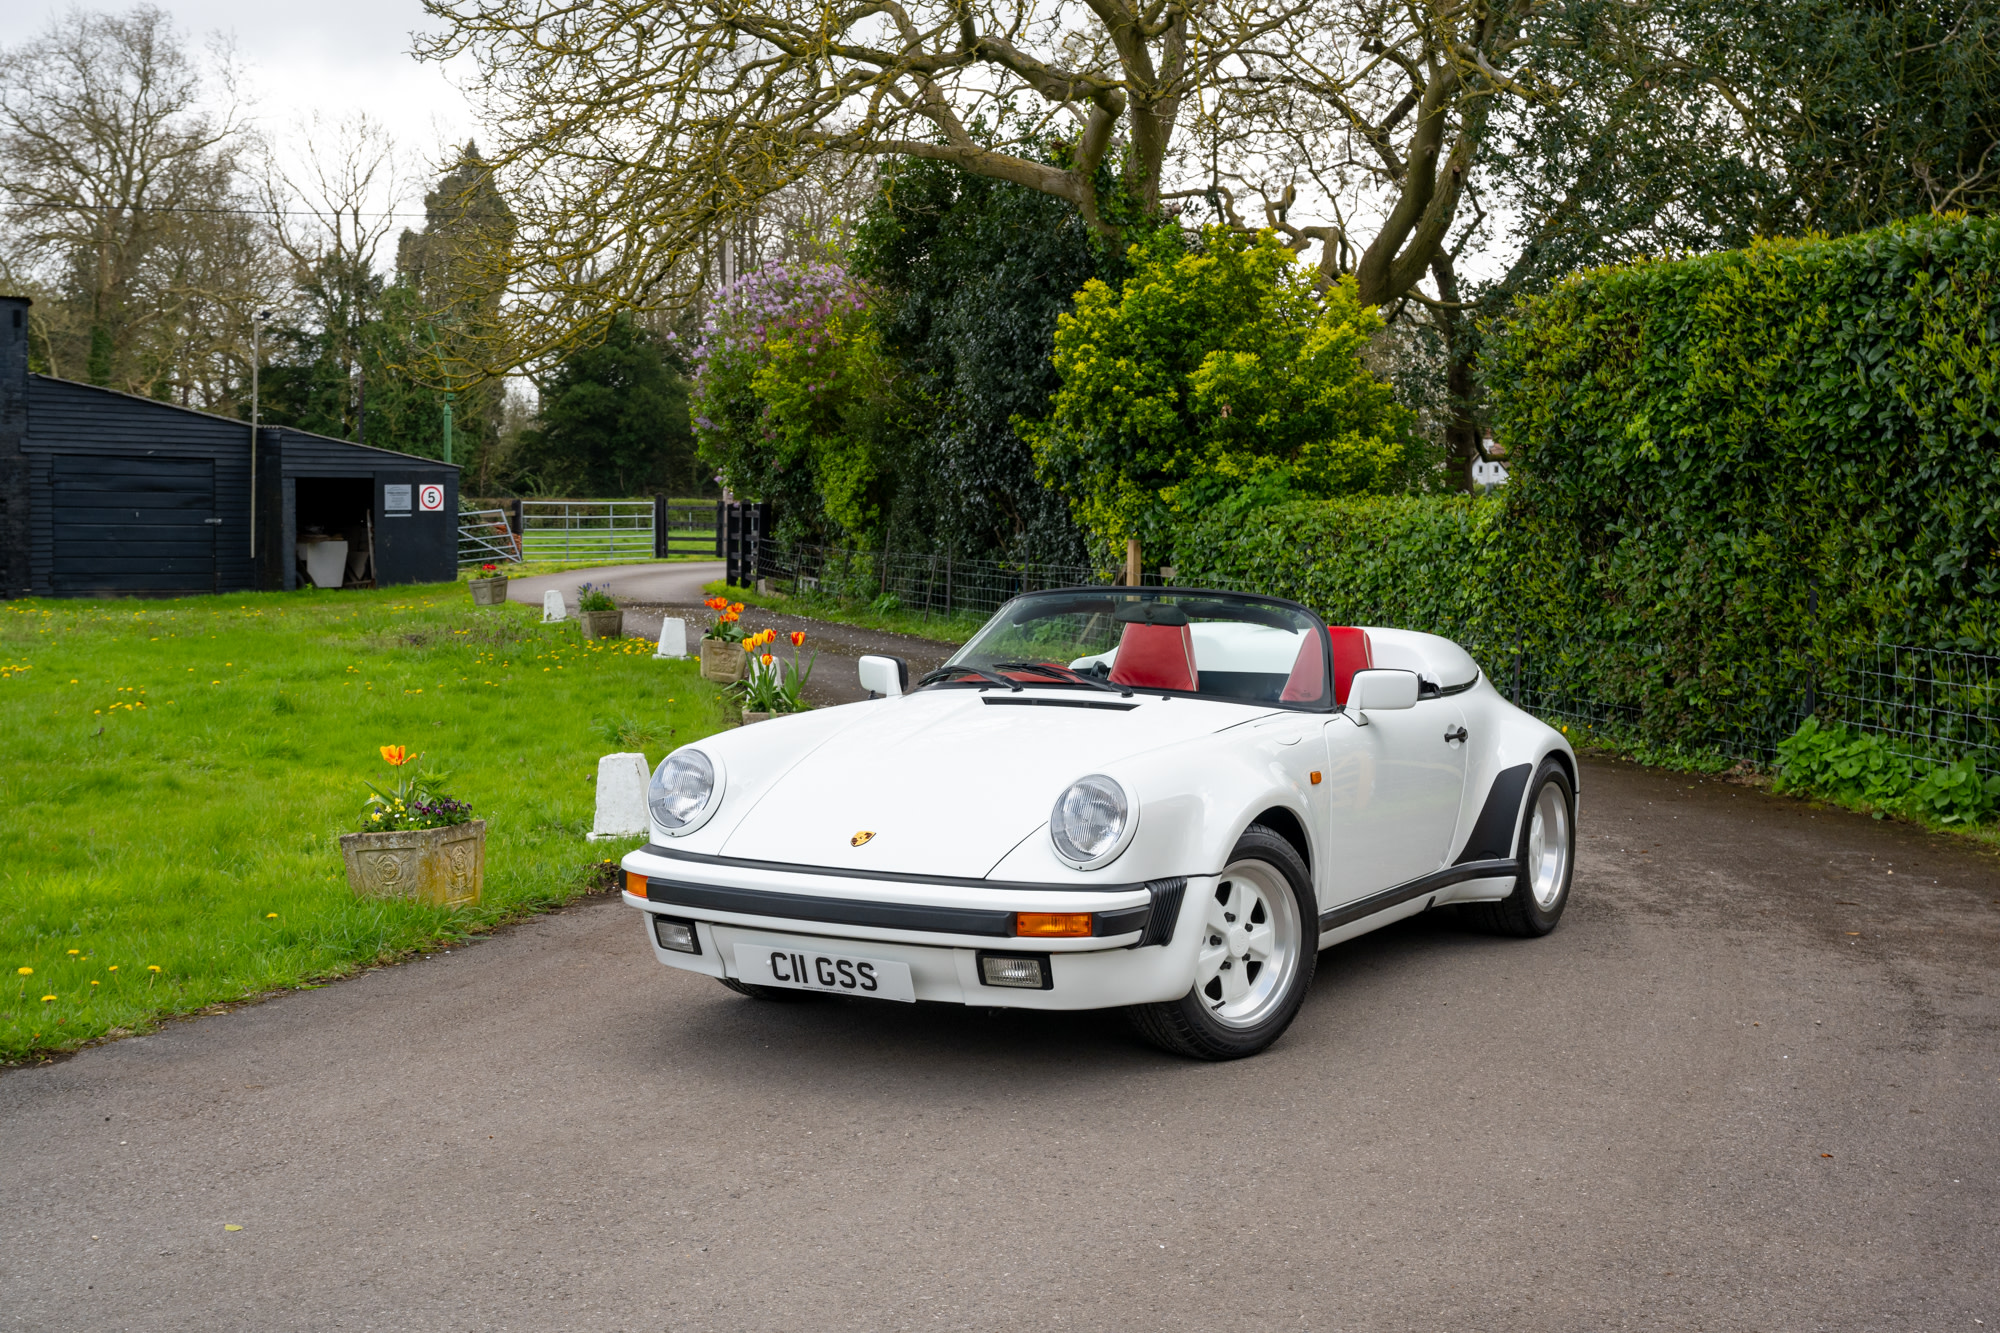 This Porsche 911 3.2 Speedster is a remarkably rare open-top sports car, which has had just four registered keepers from new. 0